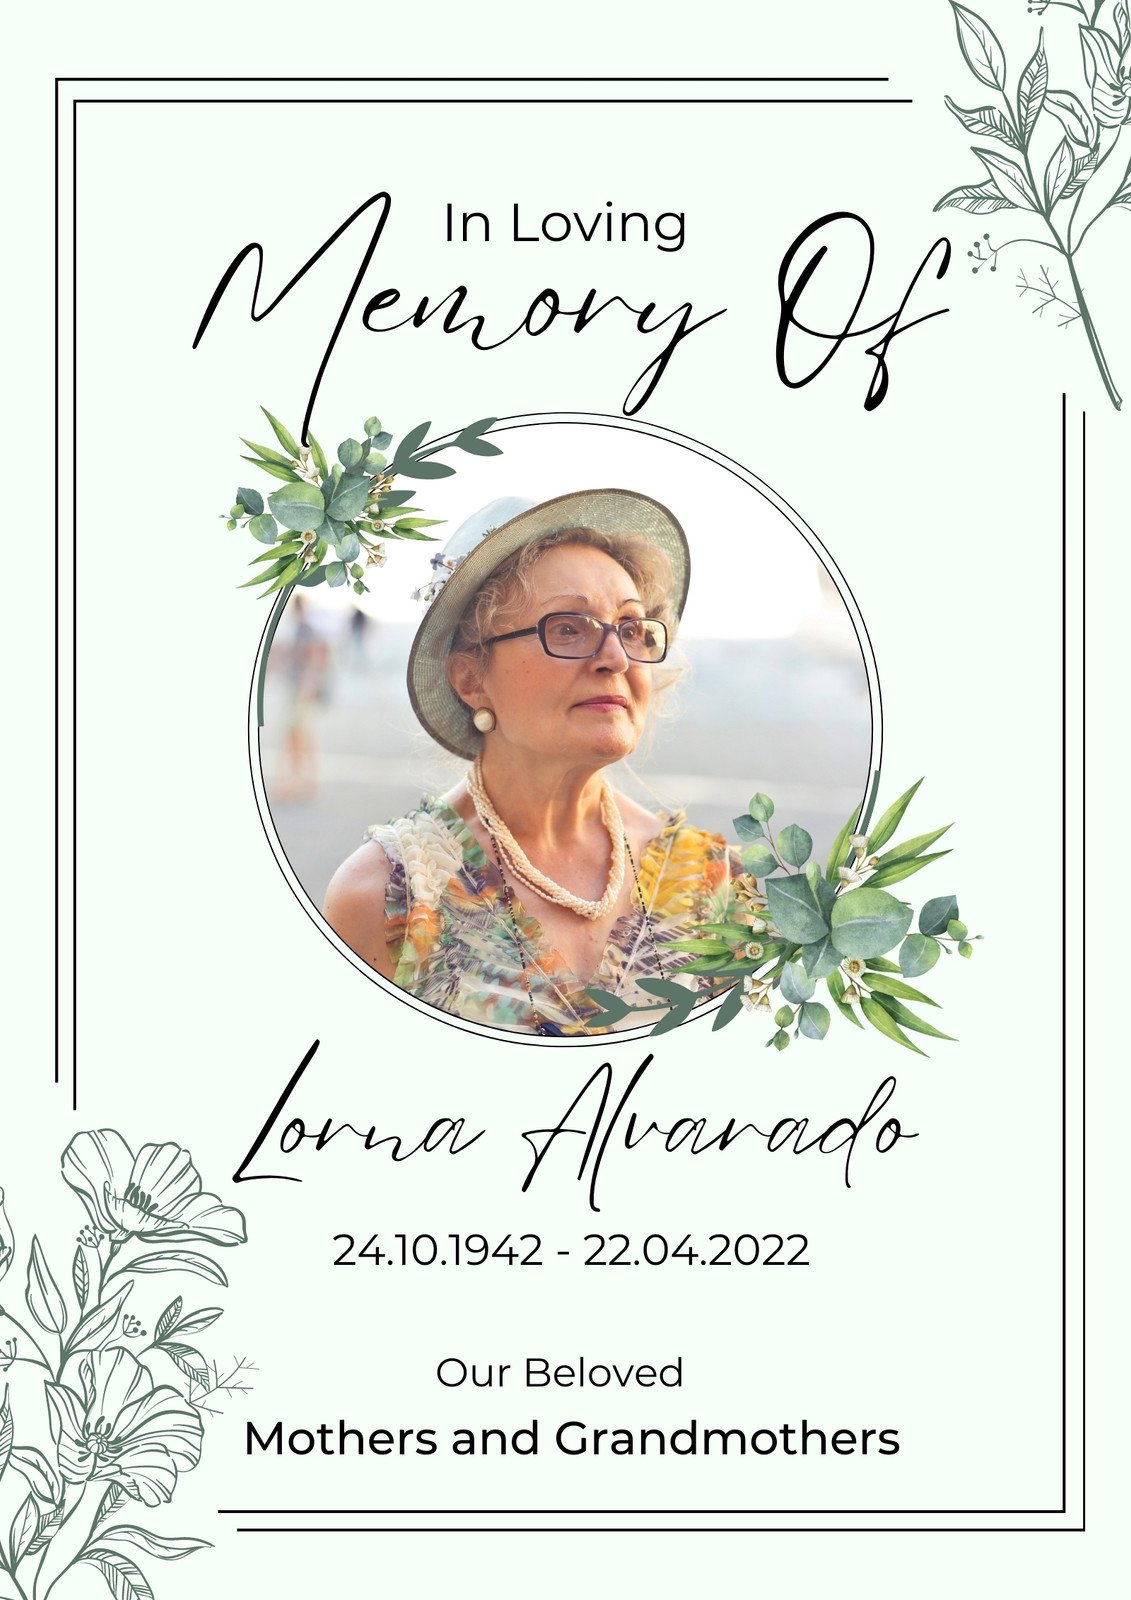 Free Printable, Customizable Funeral Program Templates | Canva with regard to Free Printable Funeral Program Template